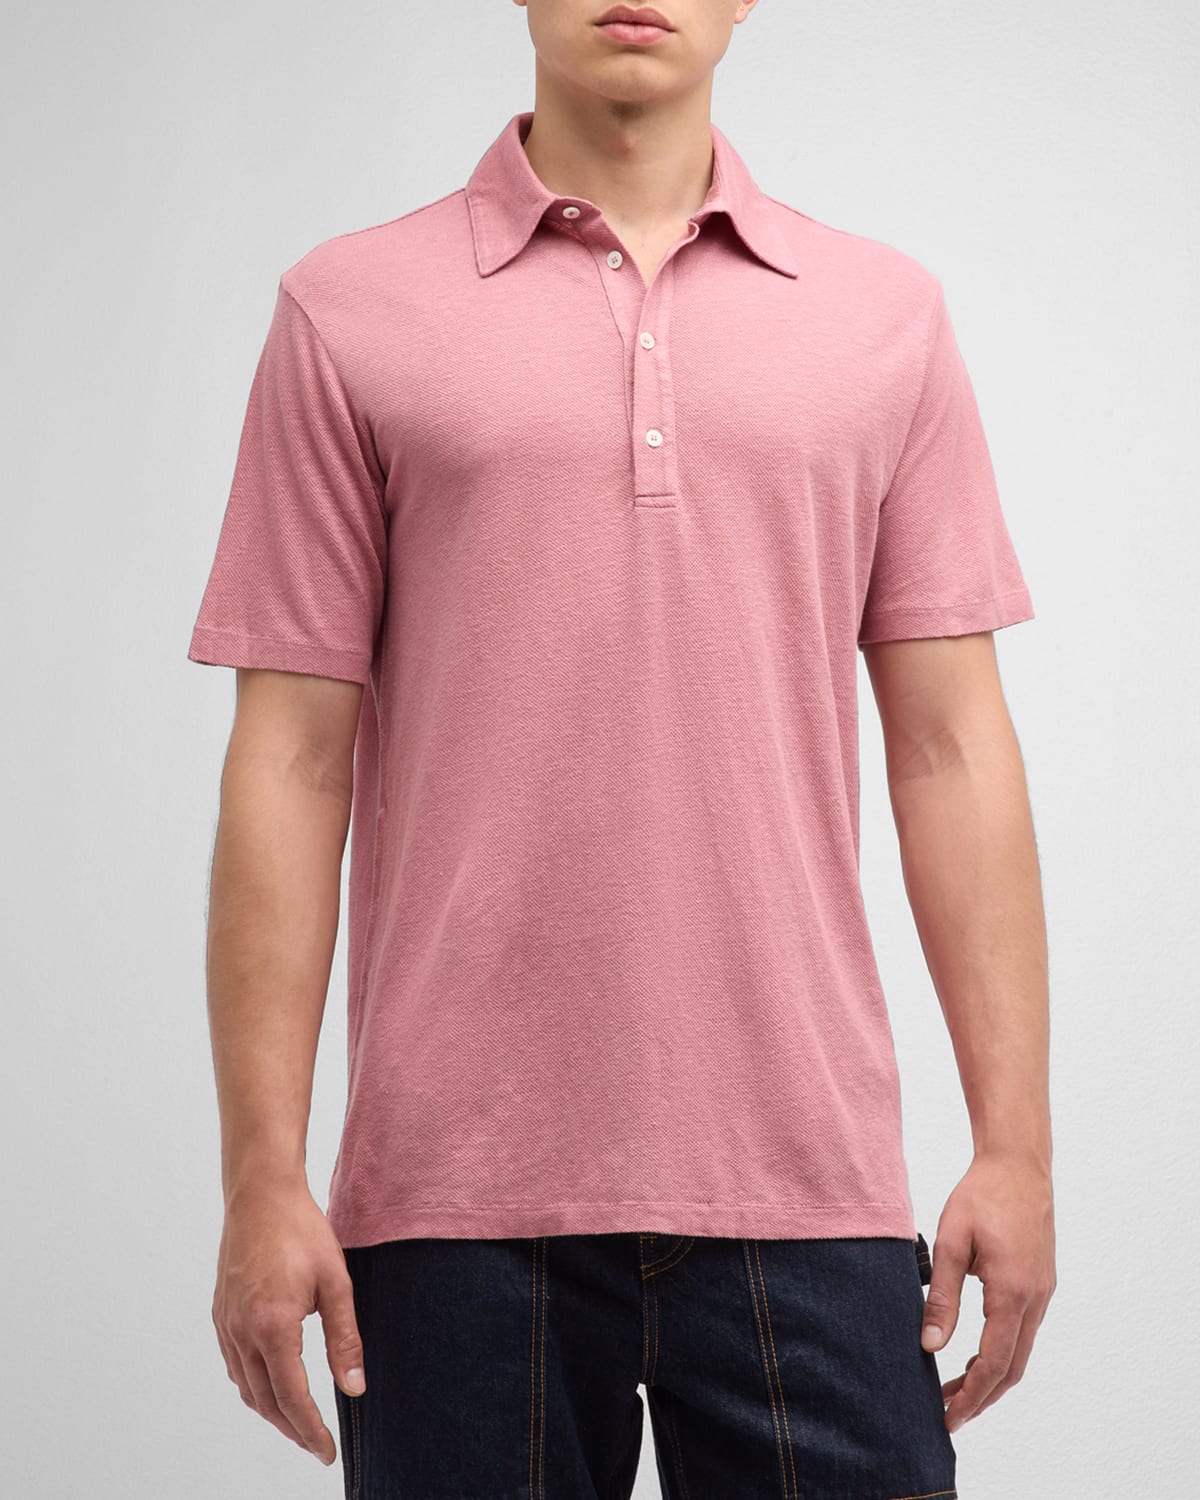 Paul Smith Men's Linen Polo Shirt In Bright Pink